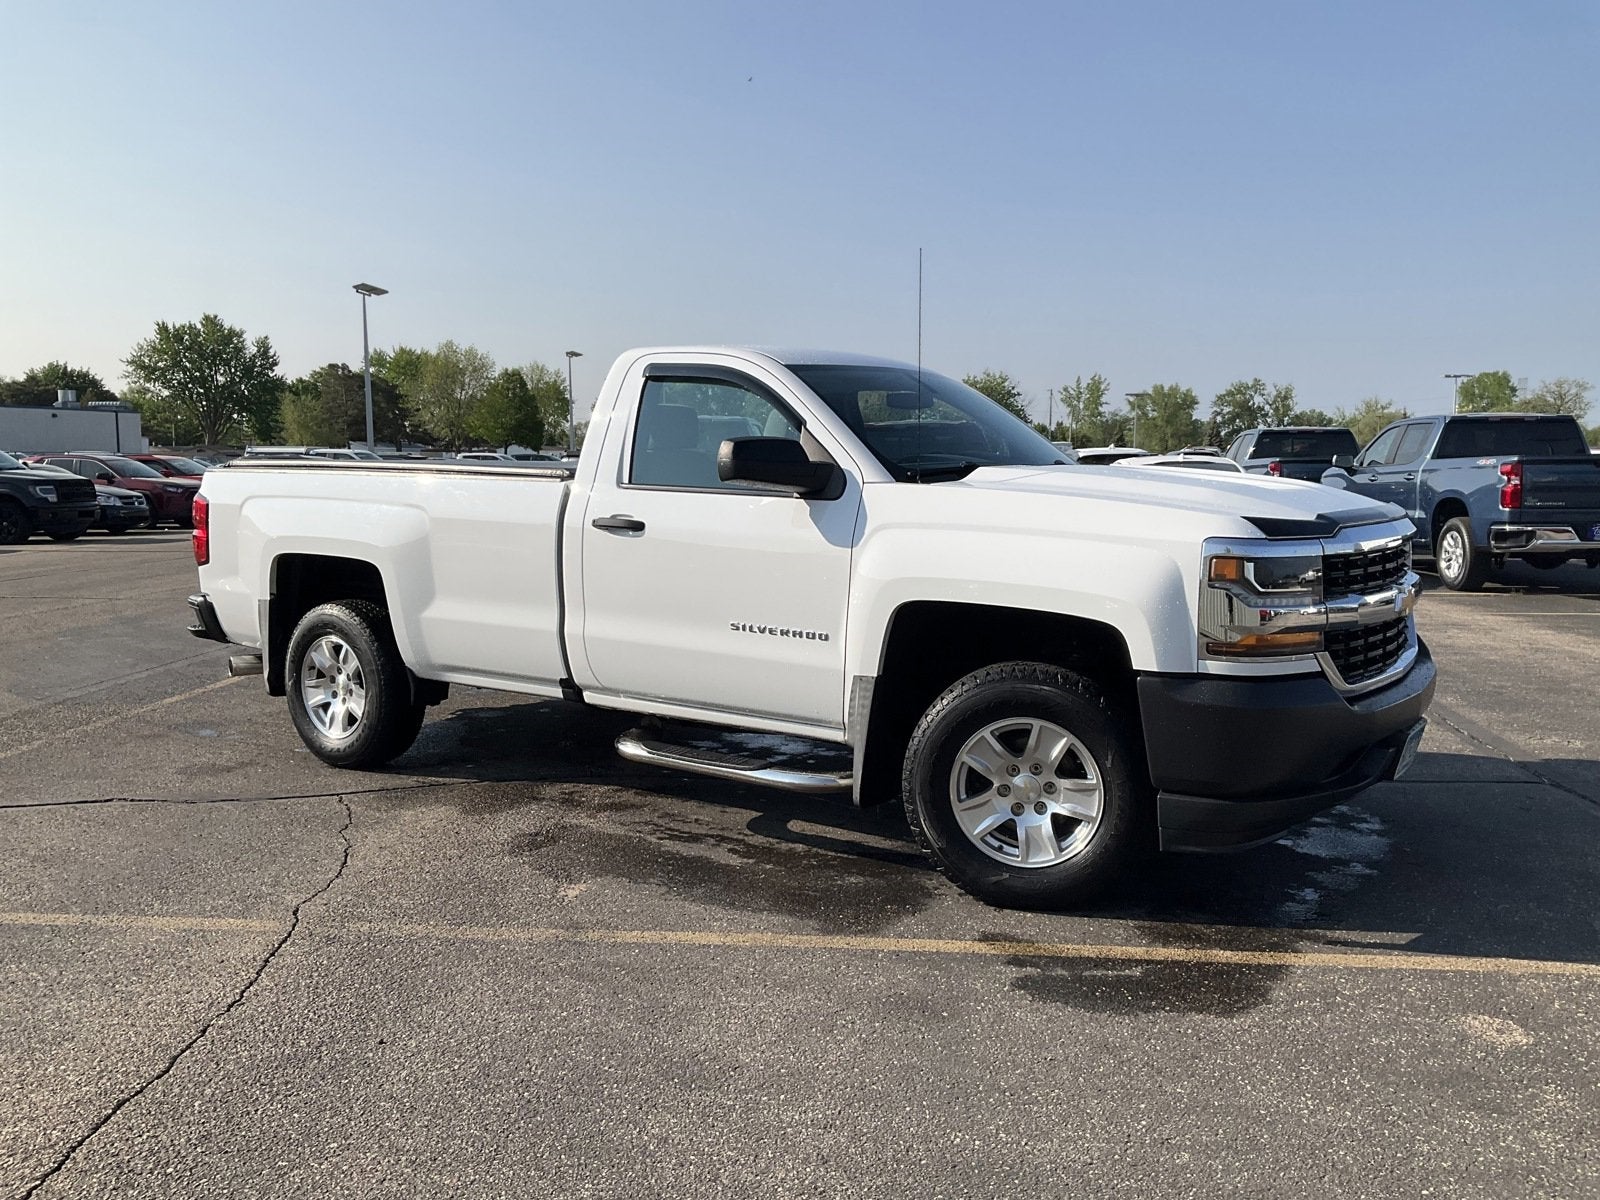 Used 2017 Chevrolet Silverado 1500 Work Truck 1WT with VIN 1GCNCNEH9HZ177453 for sale in Fridley, Minnesota